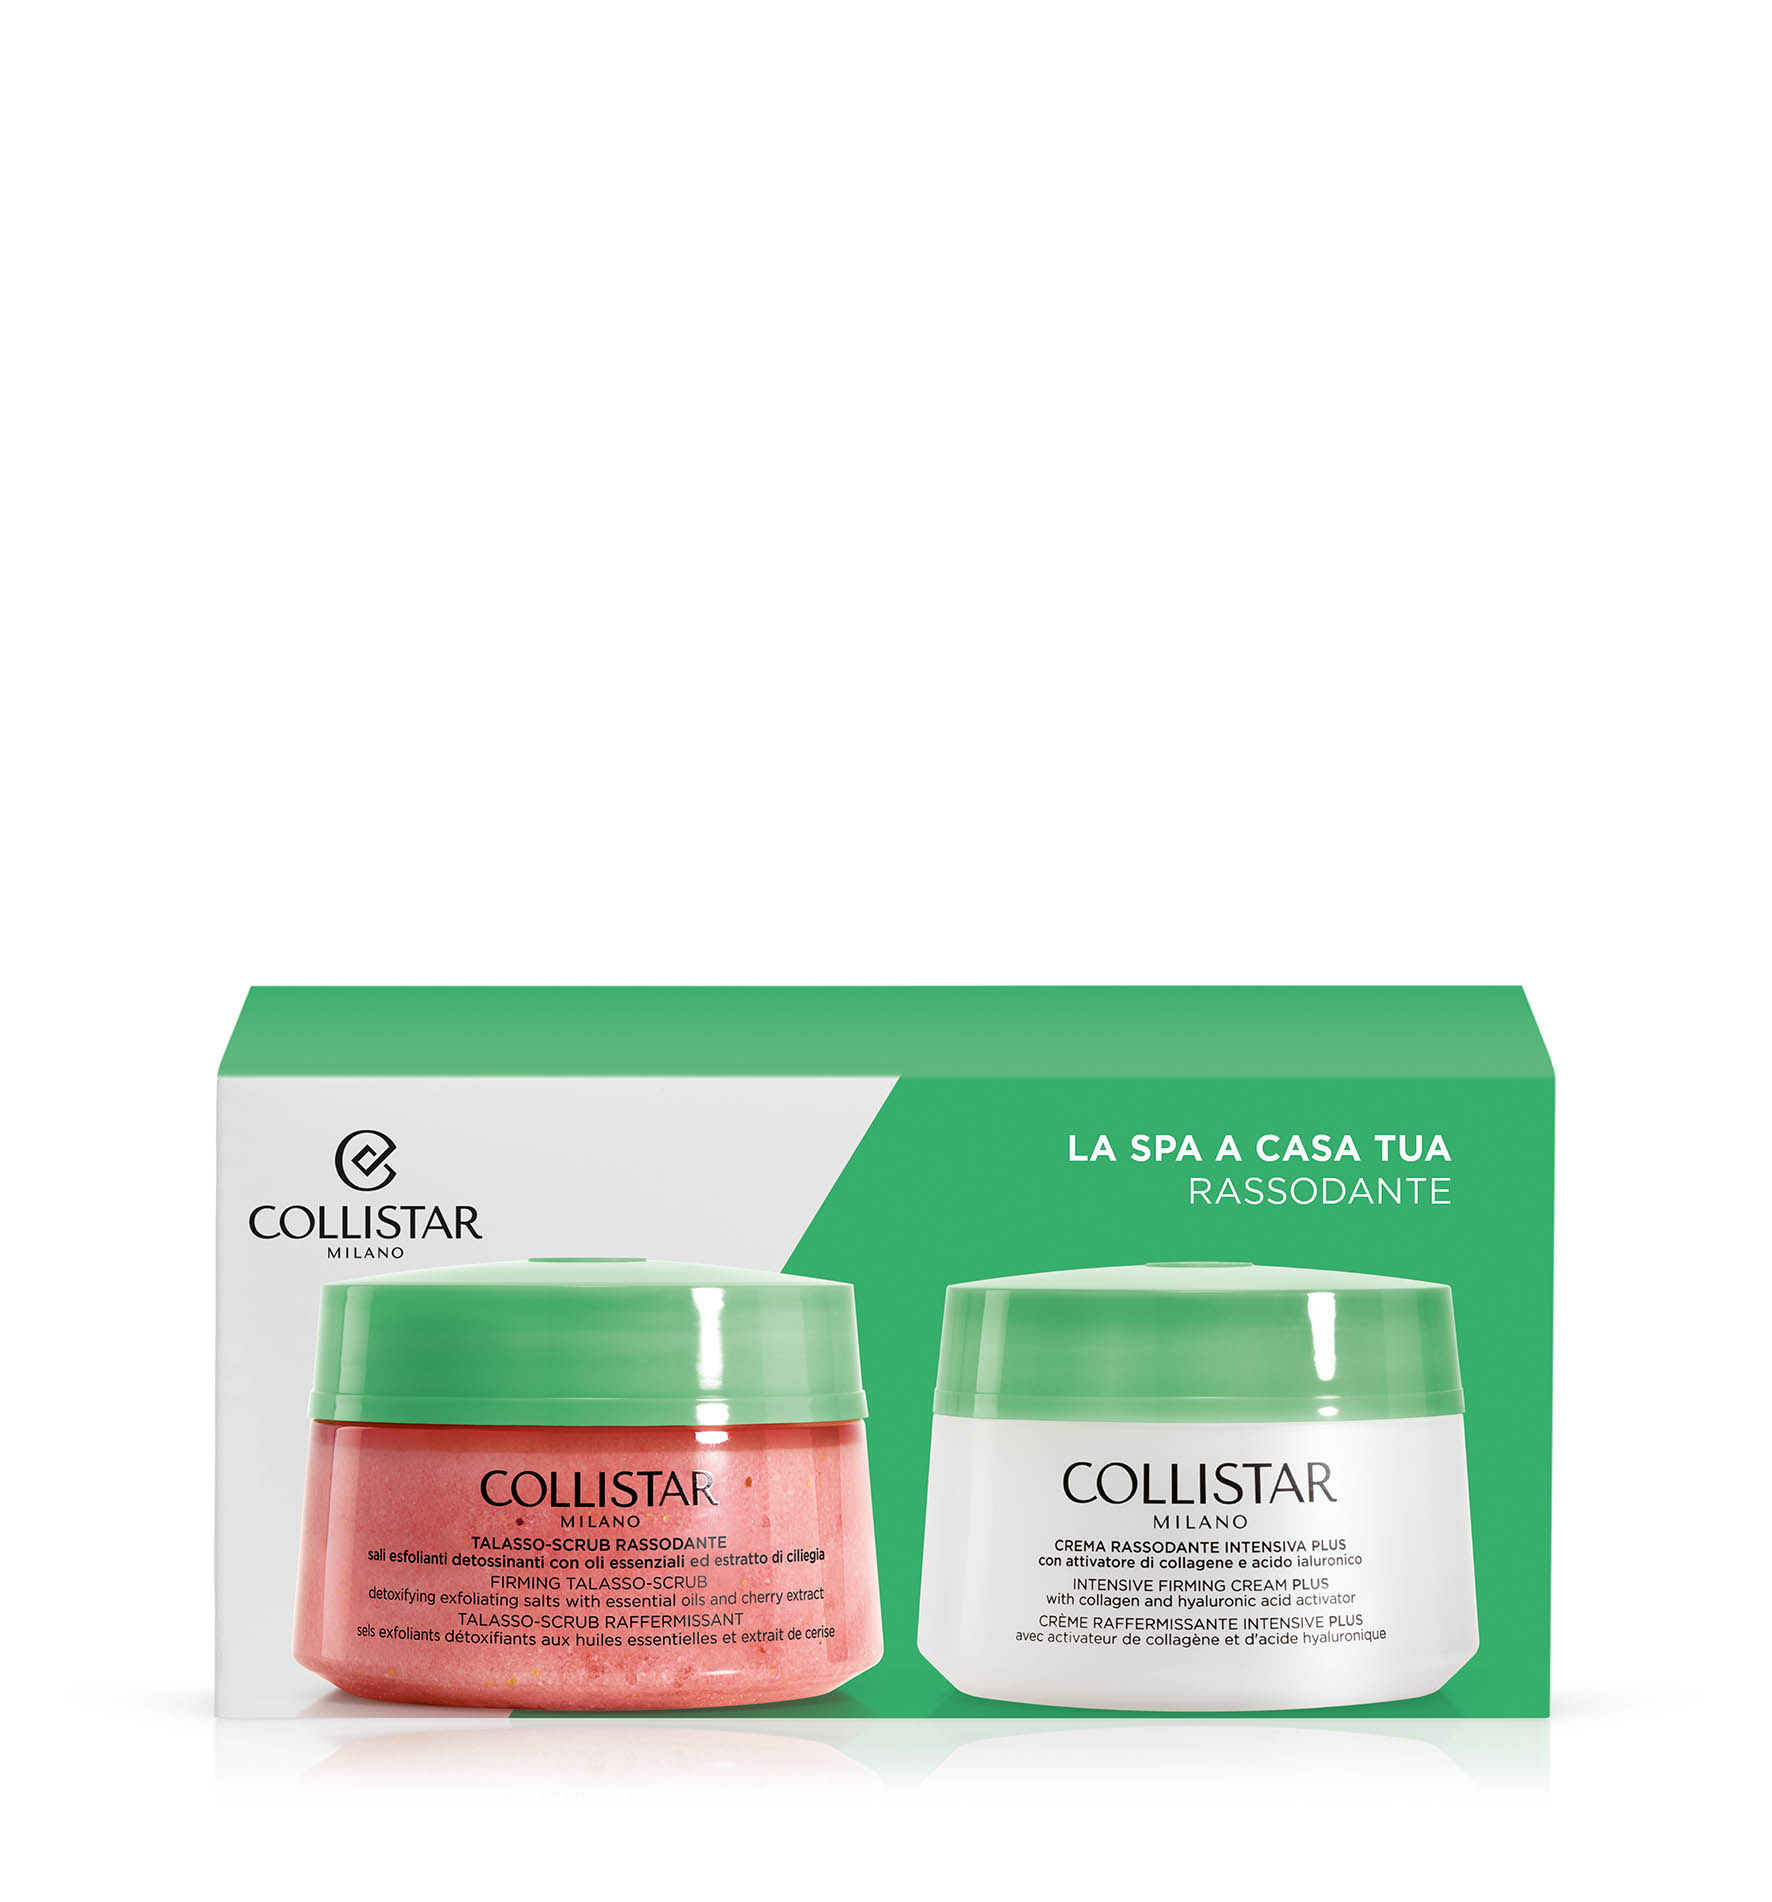 SET SPA AT HOME
- FIRMING BODY ROUTINE - Sets | Collistar - Shop Online Ufficiale